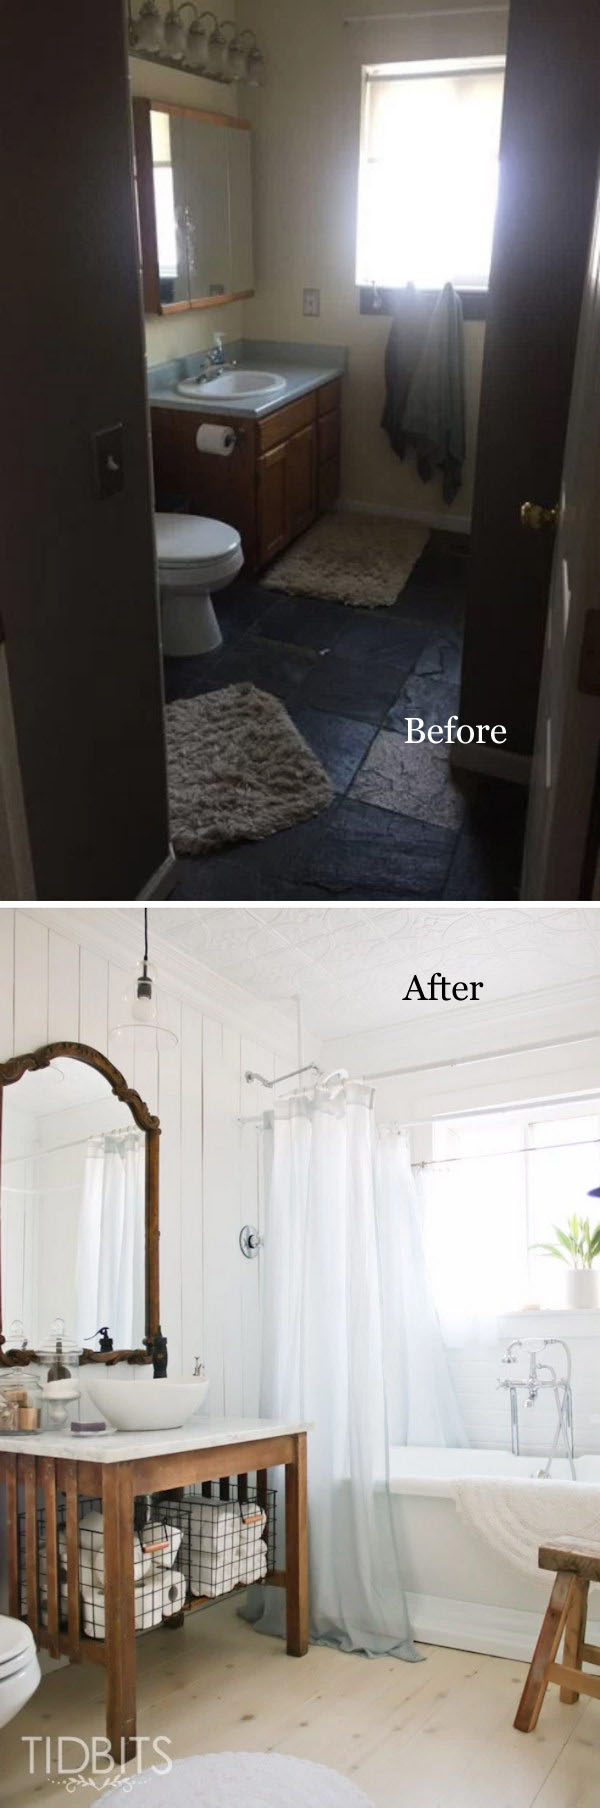 60-bathroom-remodel-before-and-after